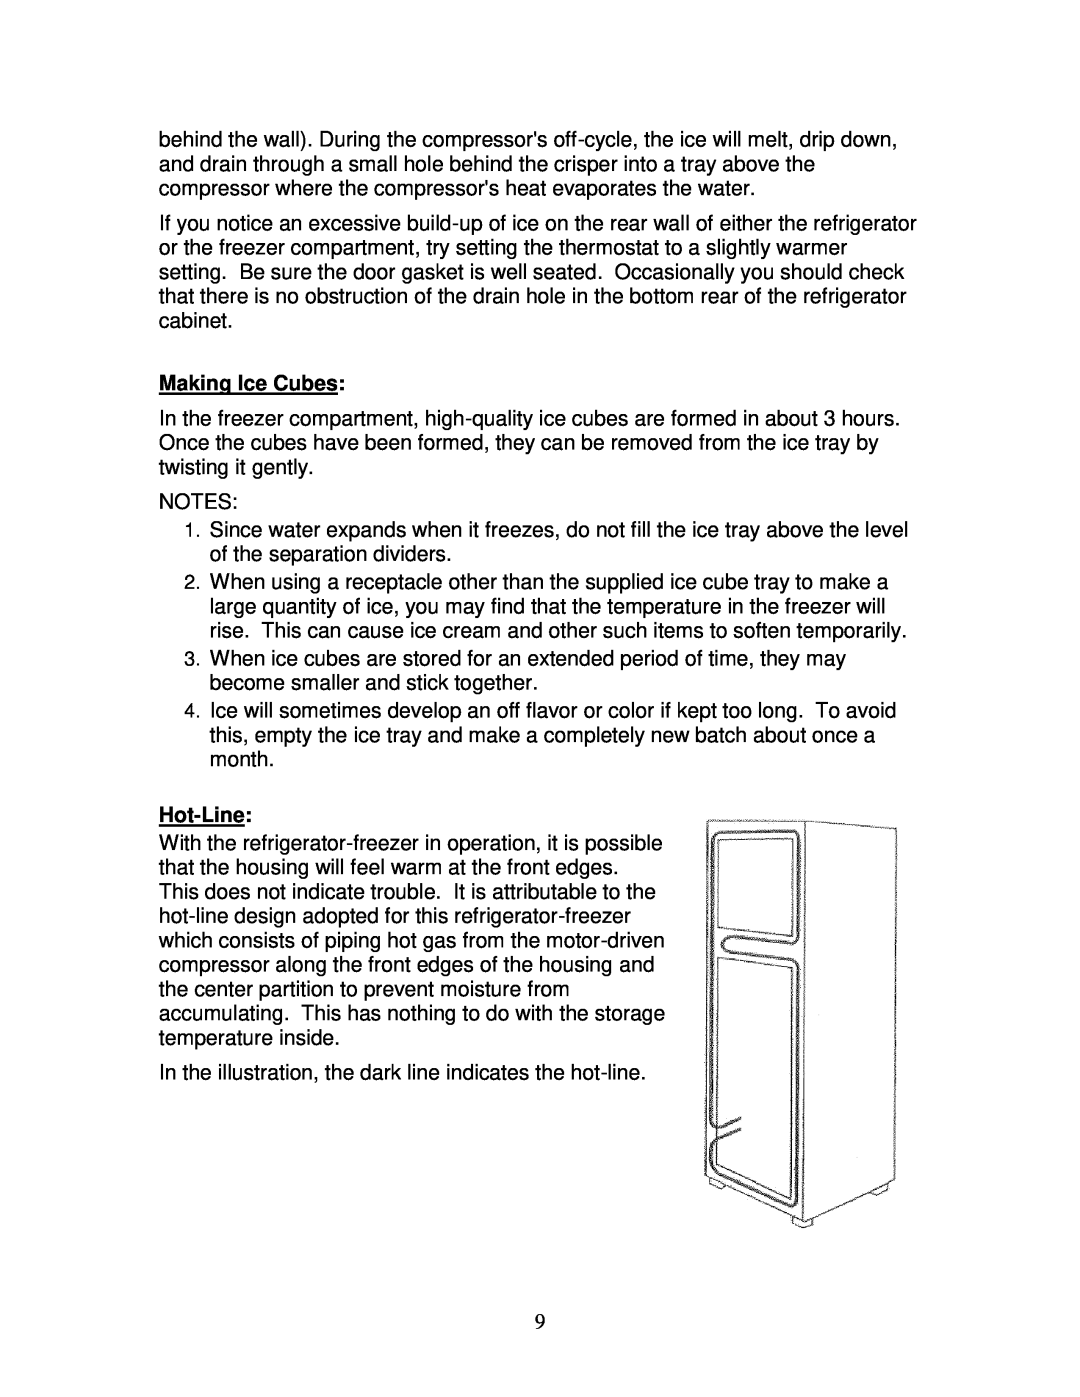 Summit FF1152SS owner manual Making Ice Cubes, Hot-Line 